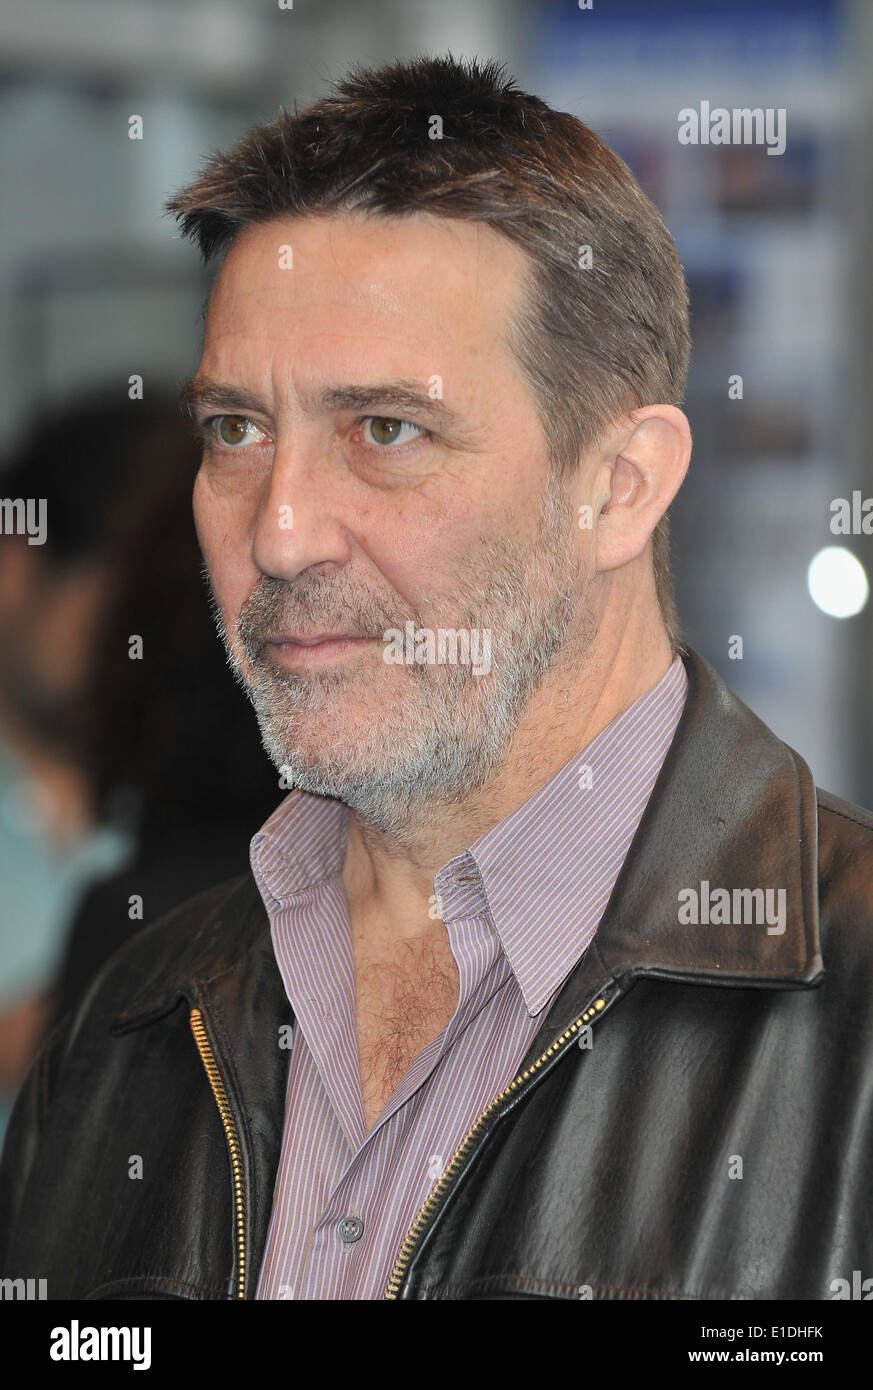 London, UK. 5th Apr, 2009. Ciaran Hinds attends the UK premiere of Race To Witch Mountain at Odeon West End. © Ferdaus Shamim/ZUMA Wire/ZUMAPRESS.com/Alamy Live News Stock Photo